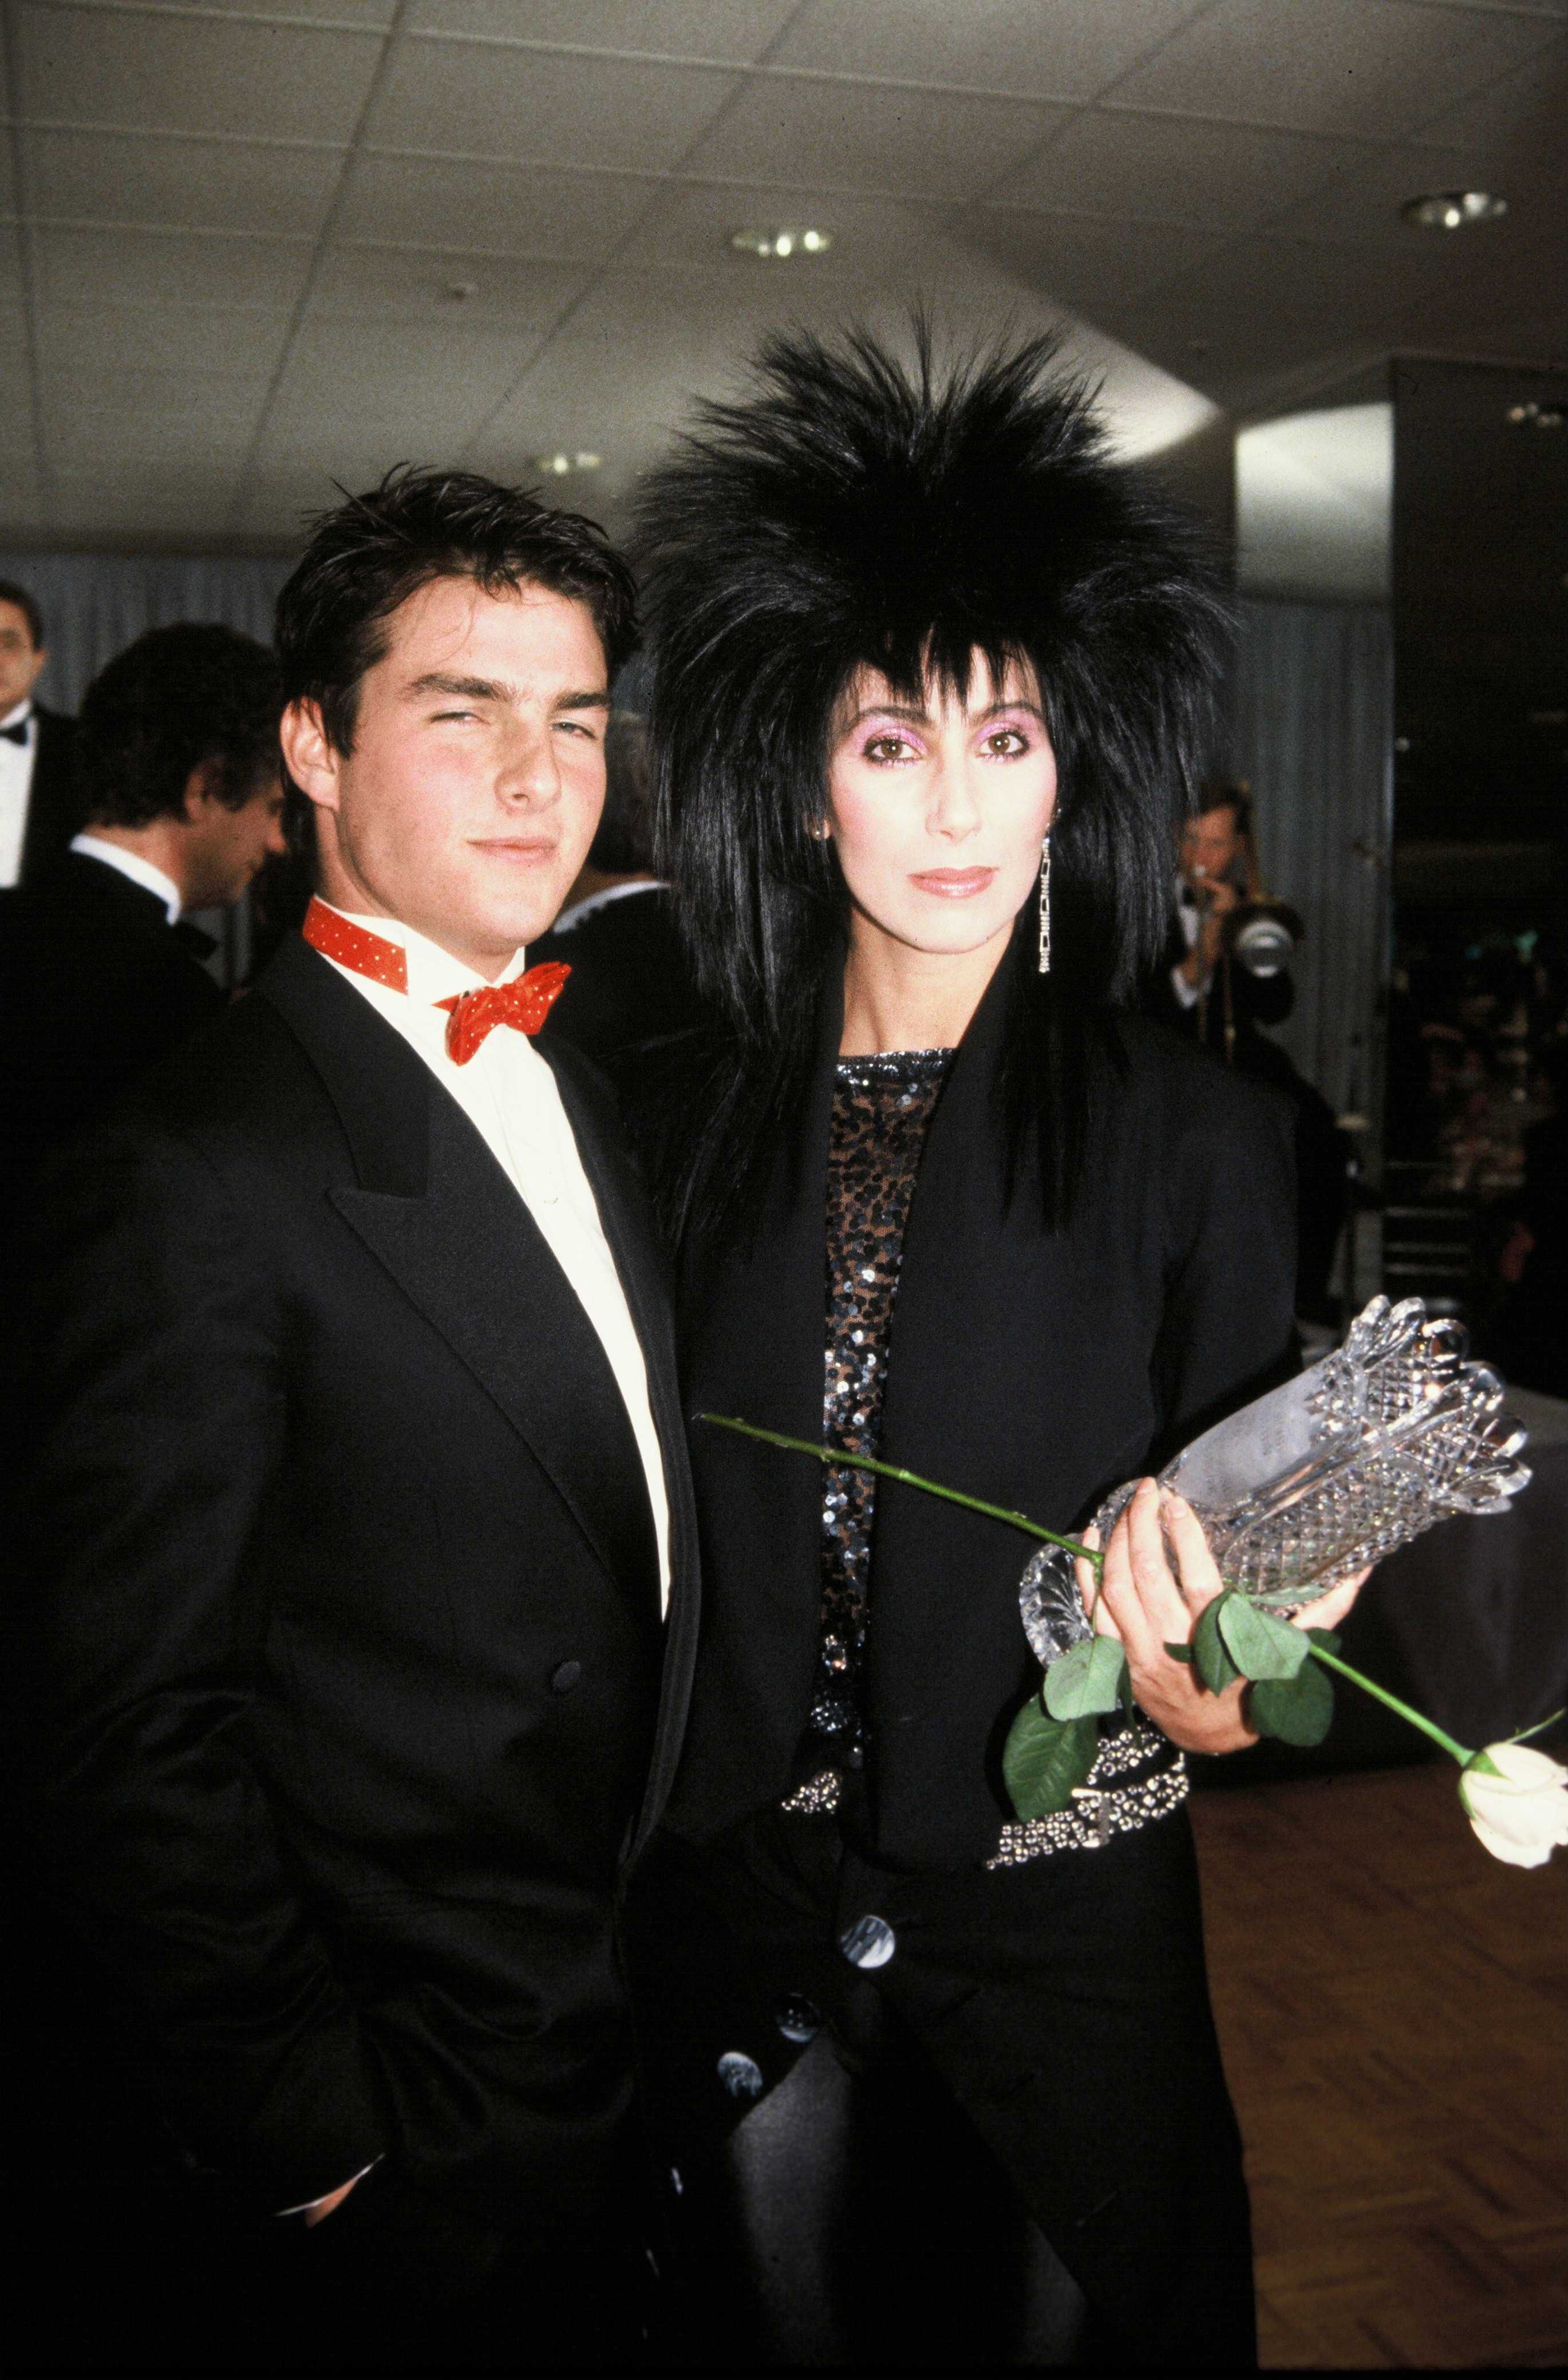 <p>Rising star Tom Cruise and Cher are seen together in this photo from 1985 -- the same year they shared a brief romance. "I lived in his apartment," the diva told <a href="https://www.wonderwall.com/celebrity/profiles/overview/oprah-winfrey-434.article">Oprah Winfrey</a> in 2008 of her short-lived affair with the actor. "He was so wonderful. And I was so crazy about him."</p>